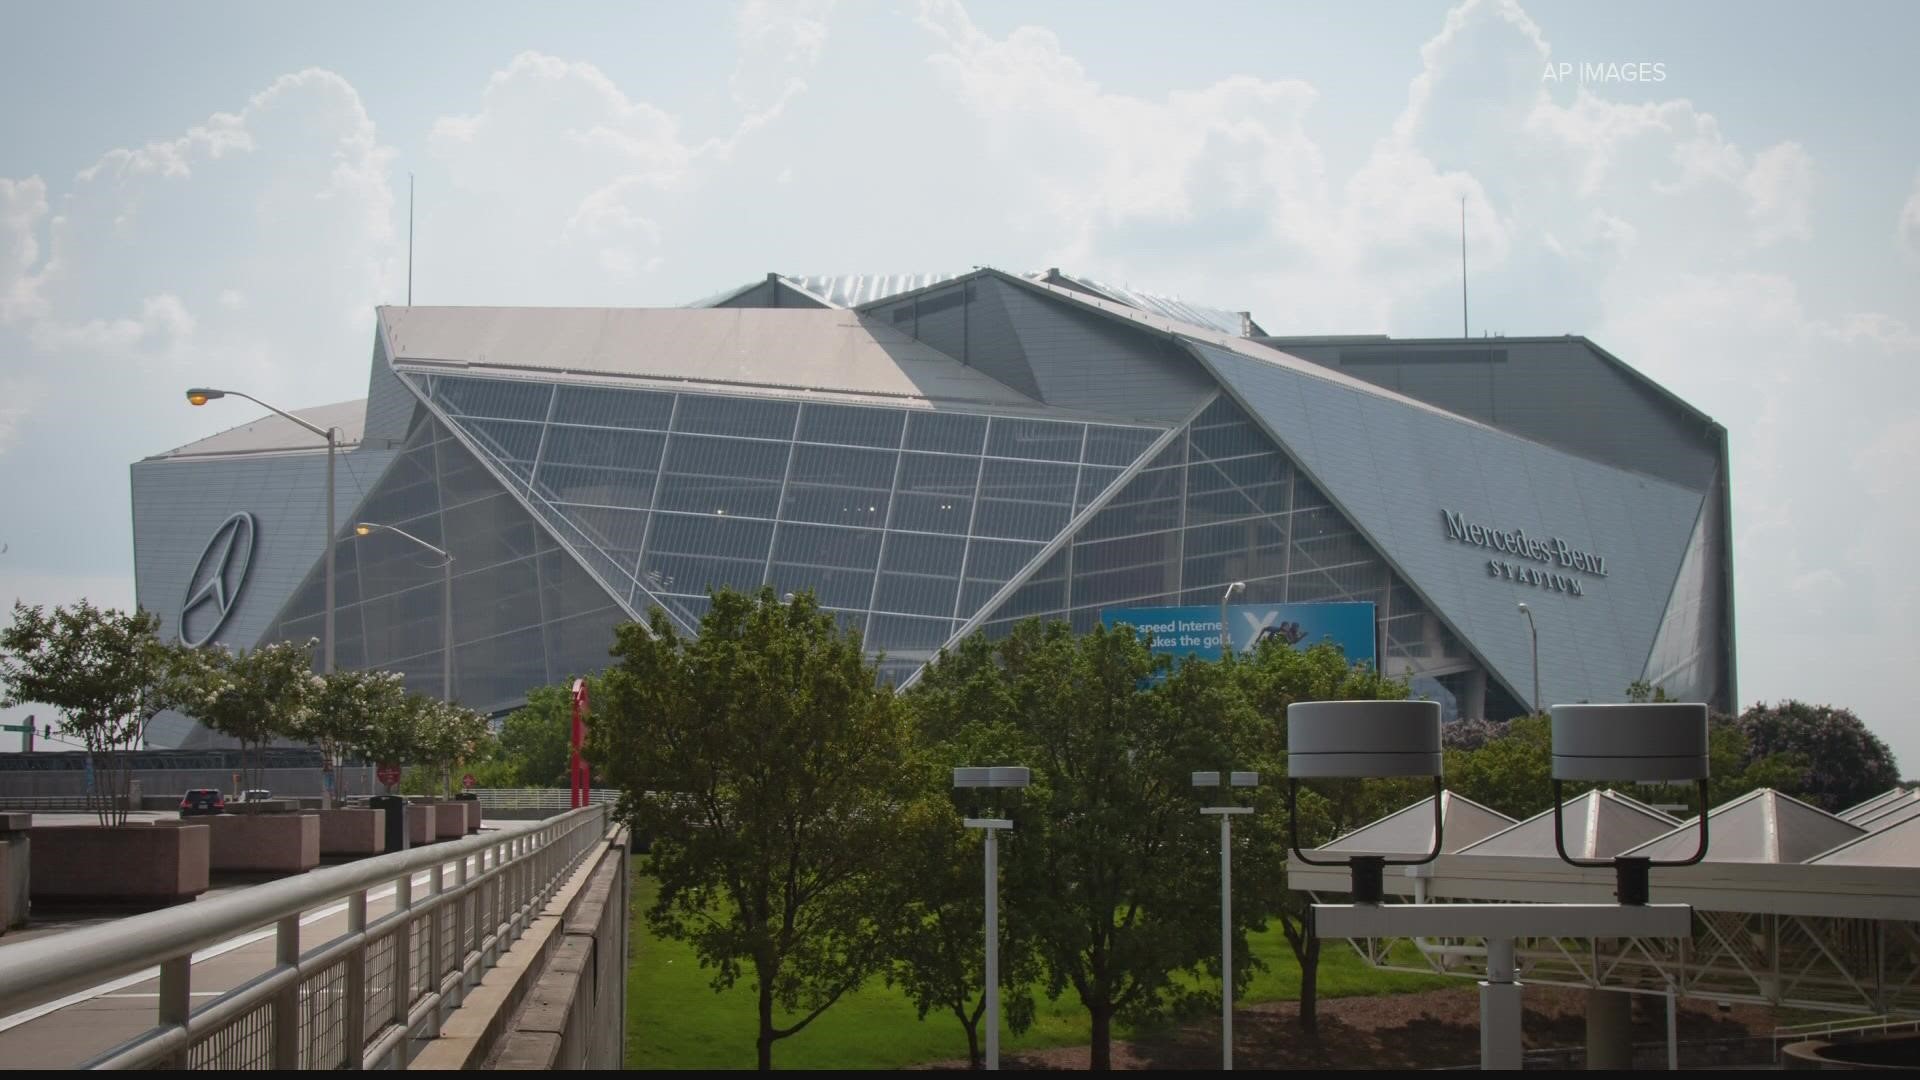 The Benz is testing out some new technology that could change the way fans enter the stadium.